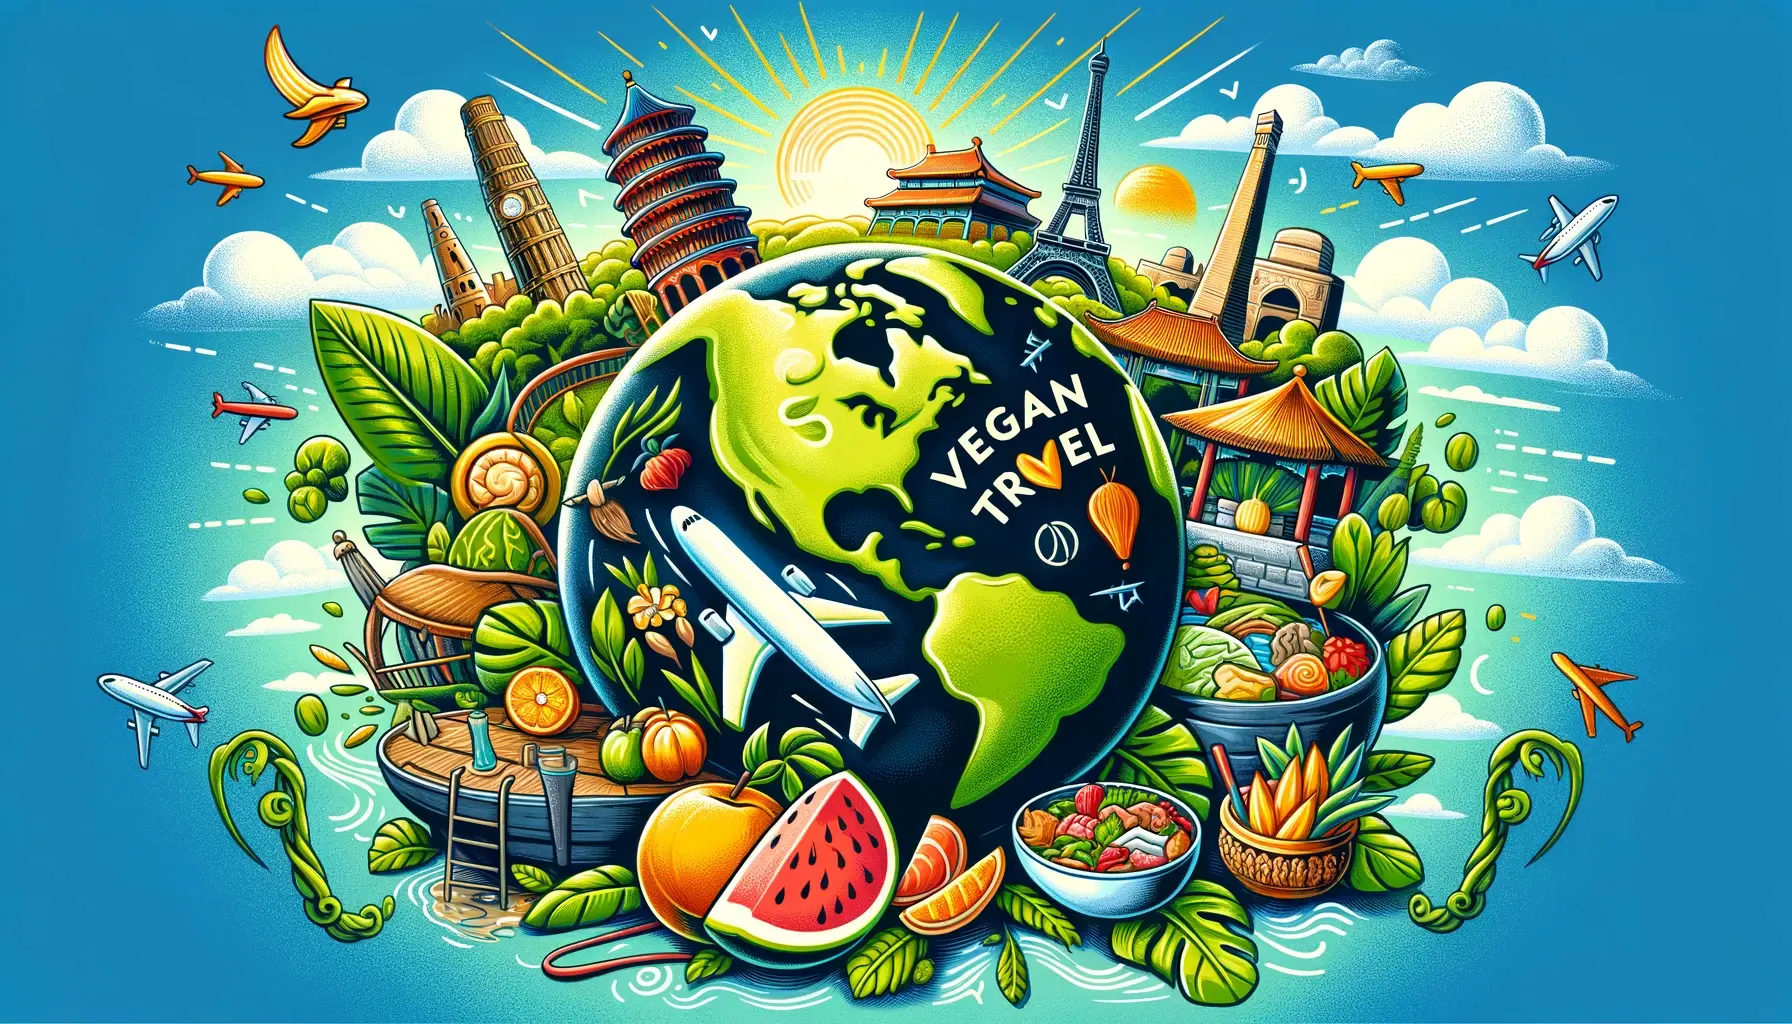 image featuring a globe with different travel destinations around it, along with vegan food symbols and elements of nature